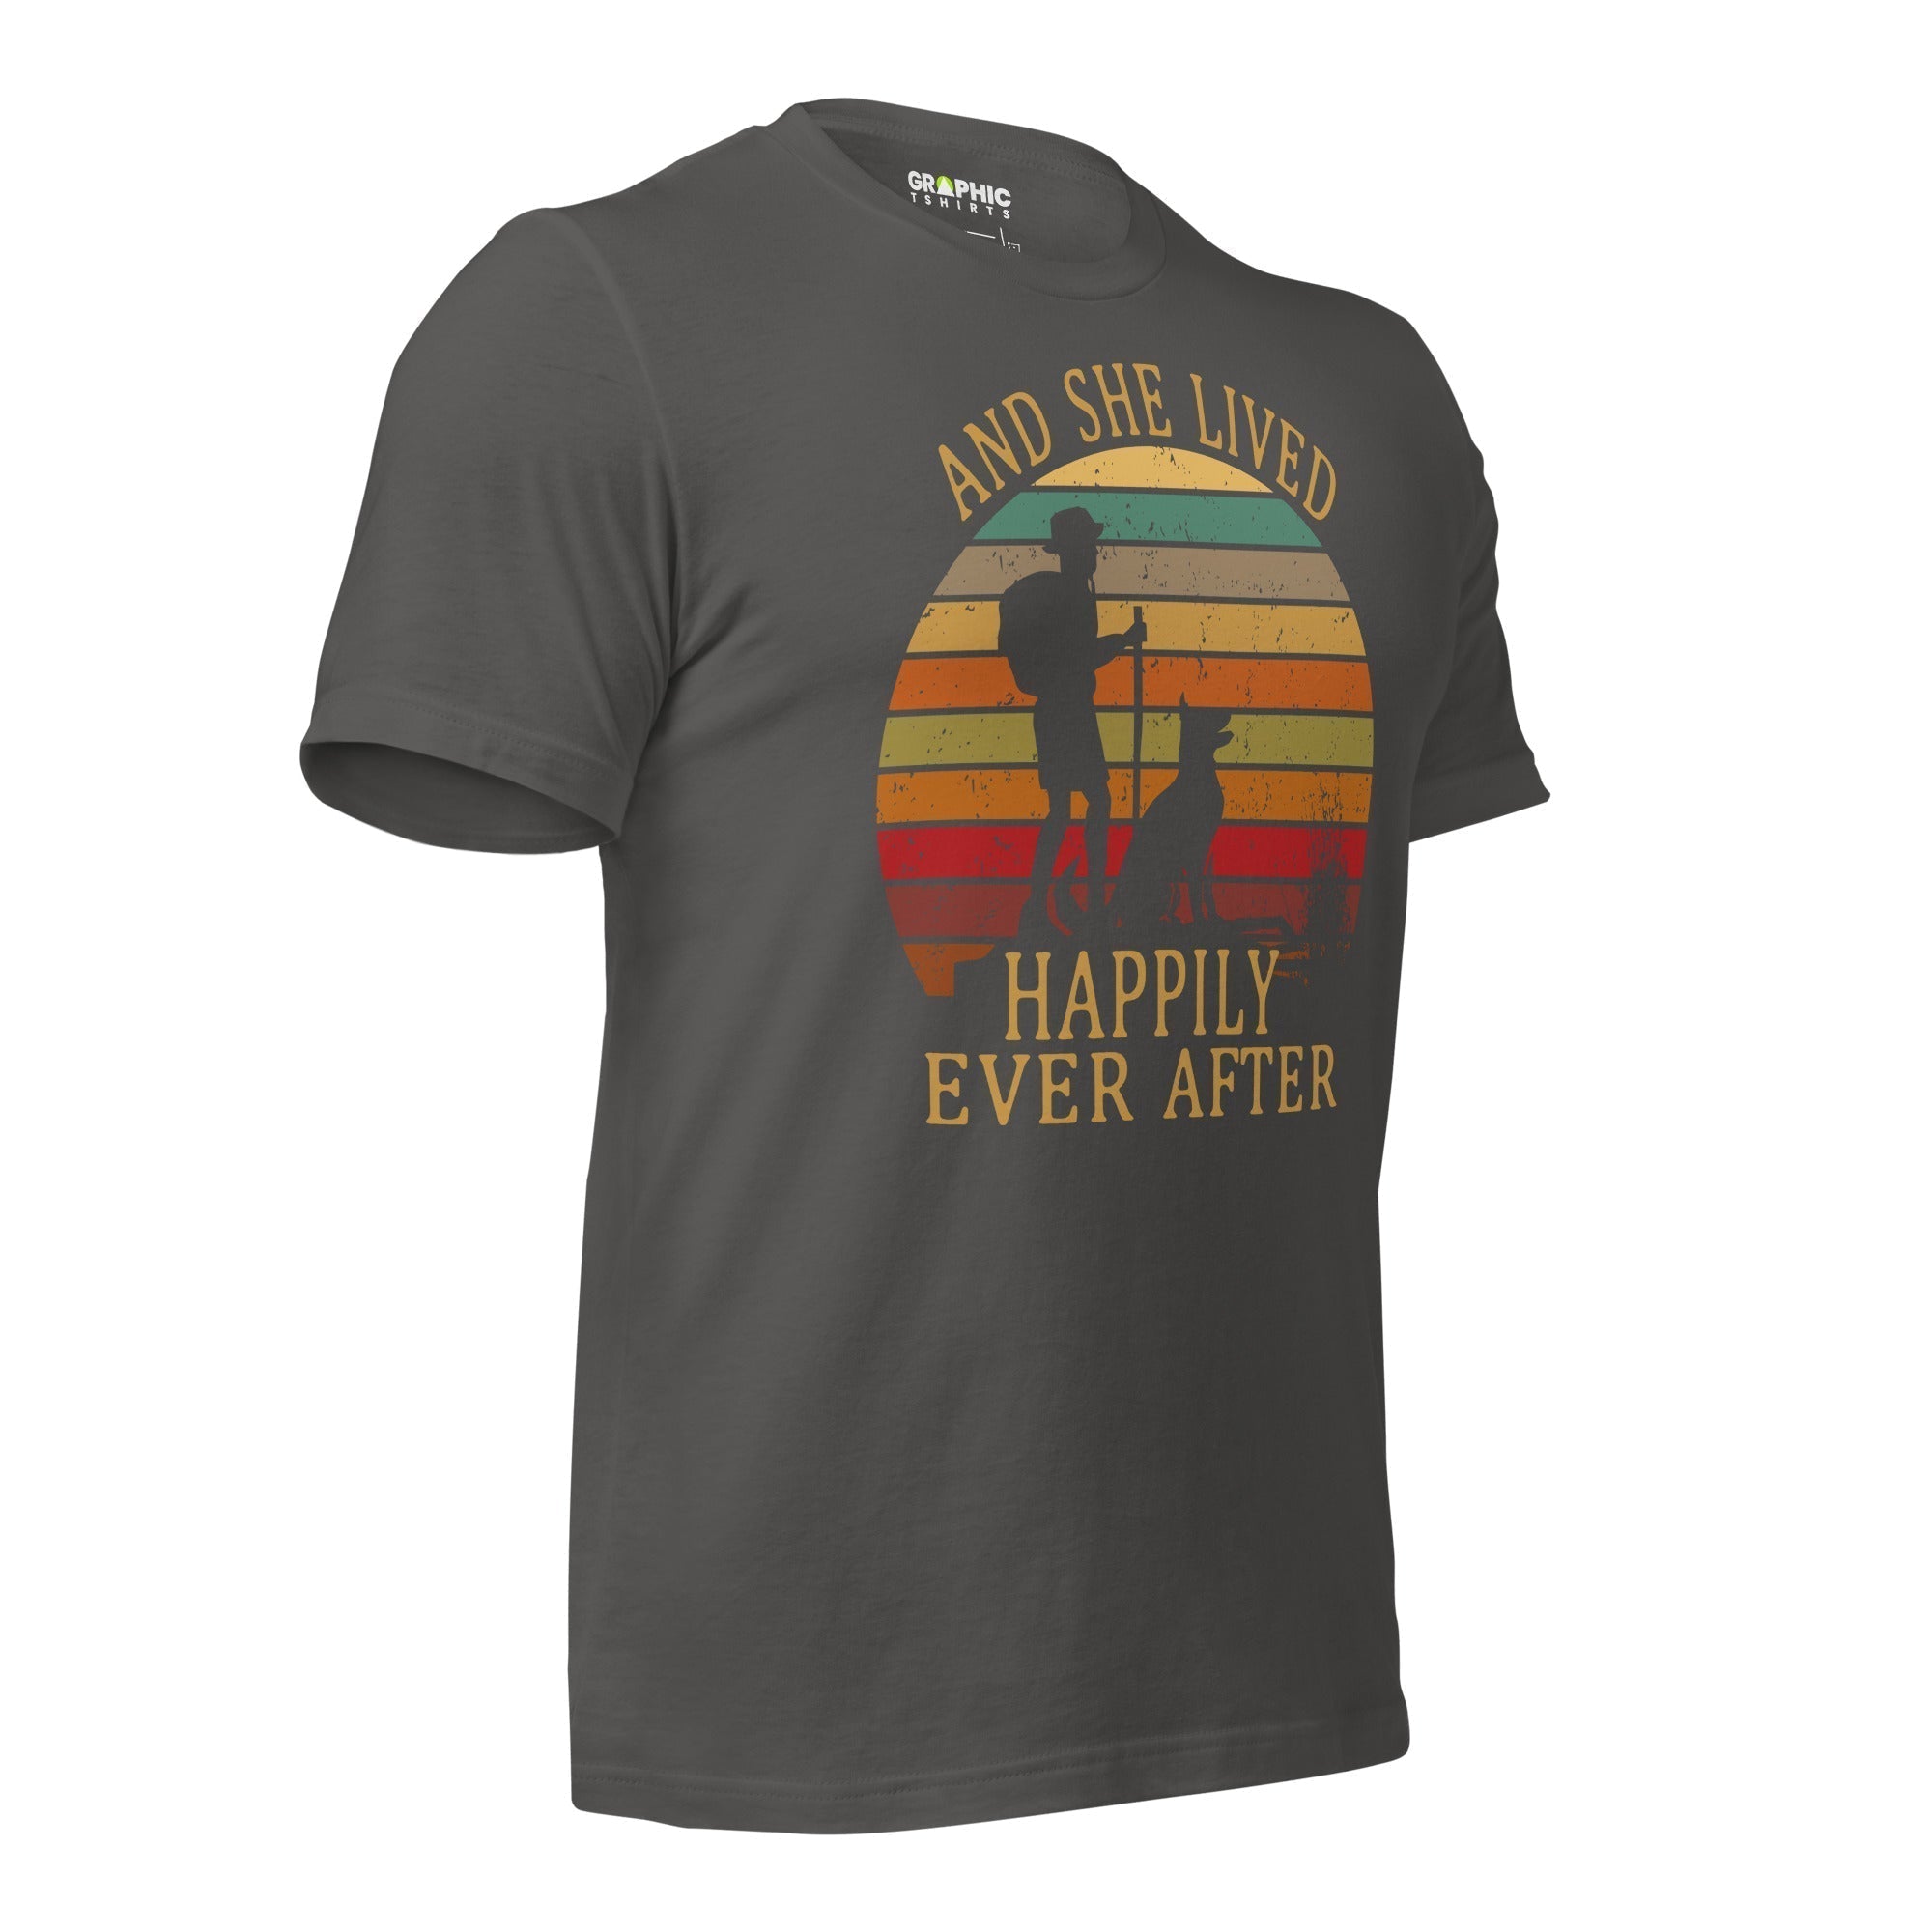 Unisex Staple T-Shirt - And She Lived Happily Ever After - GRAPHIC T-SHIRTS